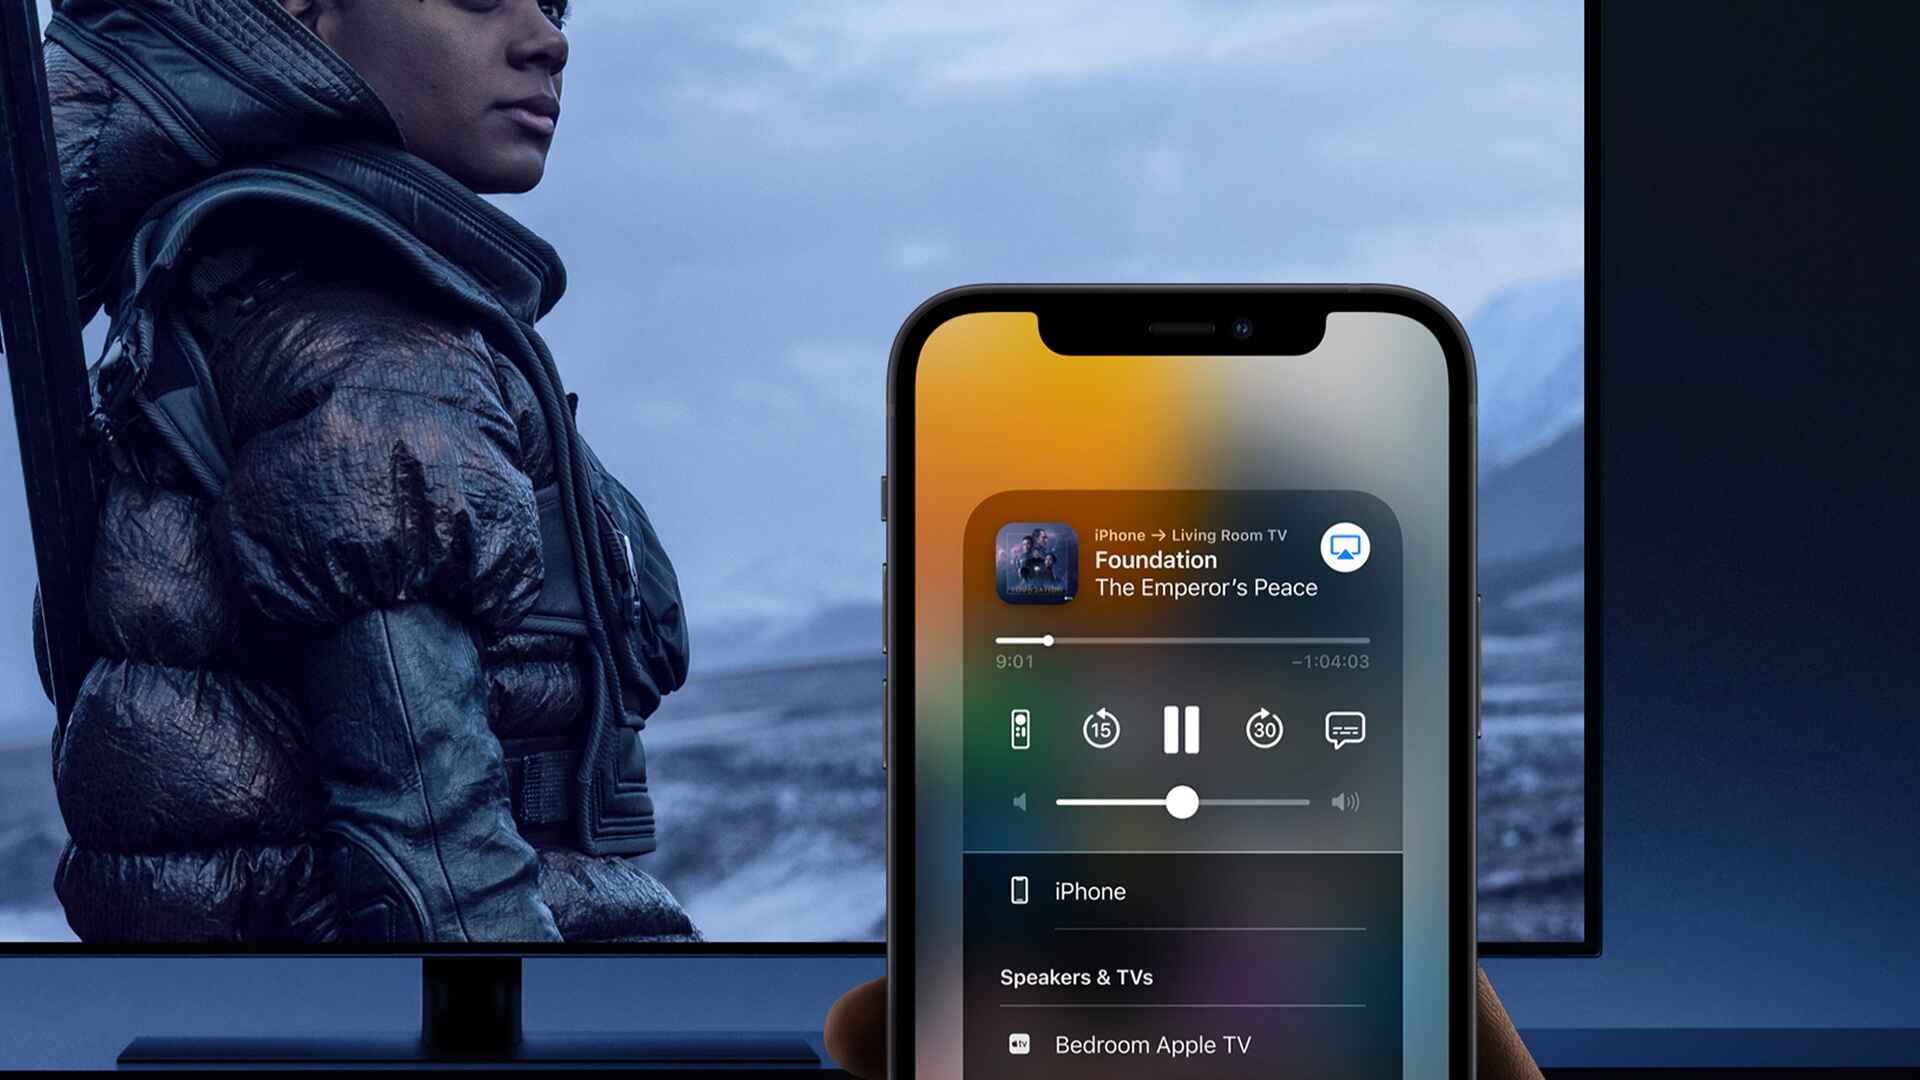 IPhone Wisdom: Wi-Fi-Free Phone To TV Connection Guide